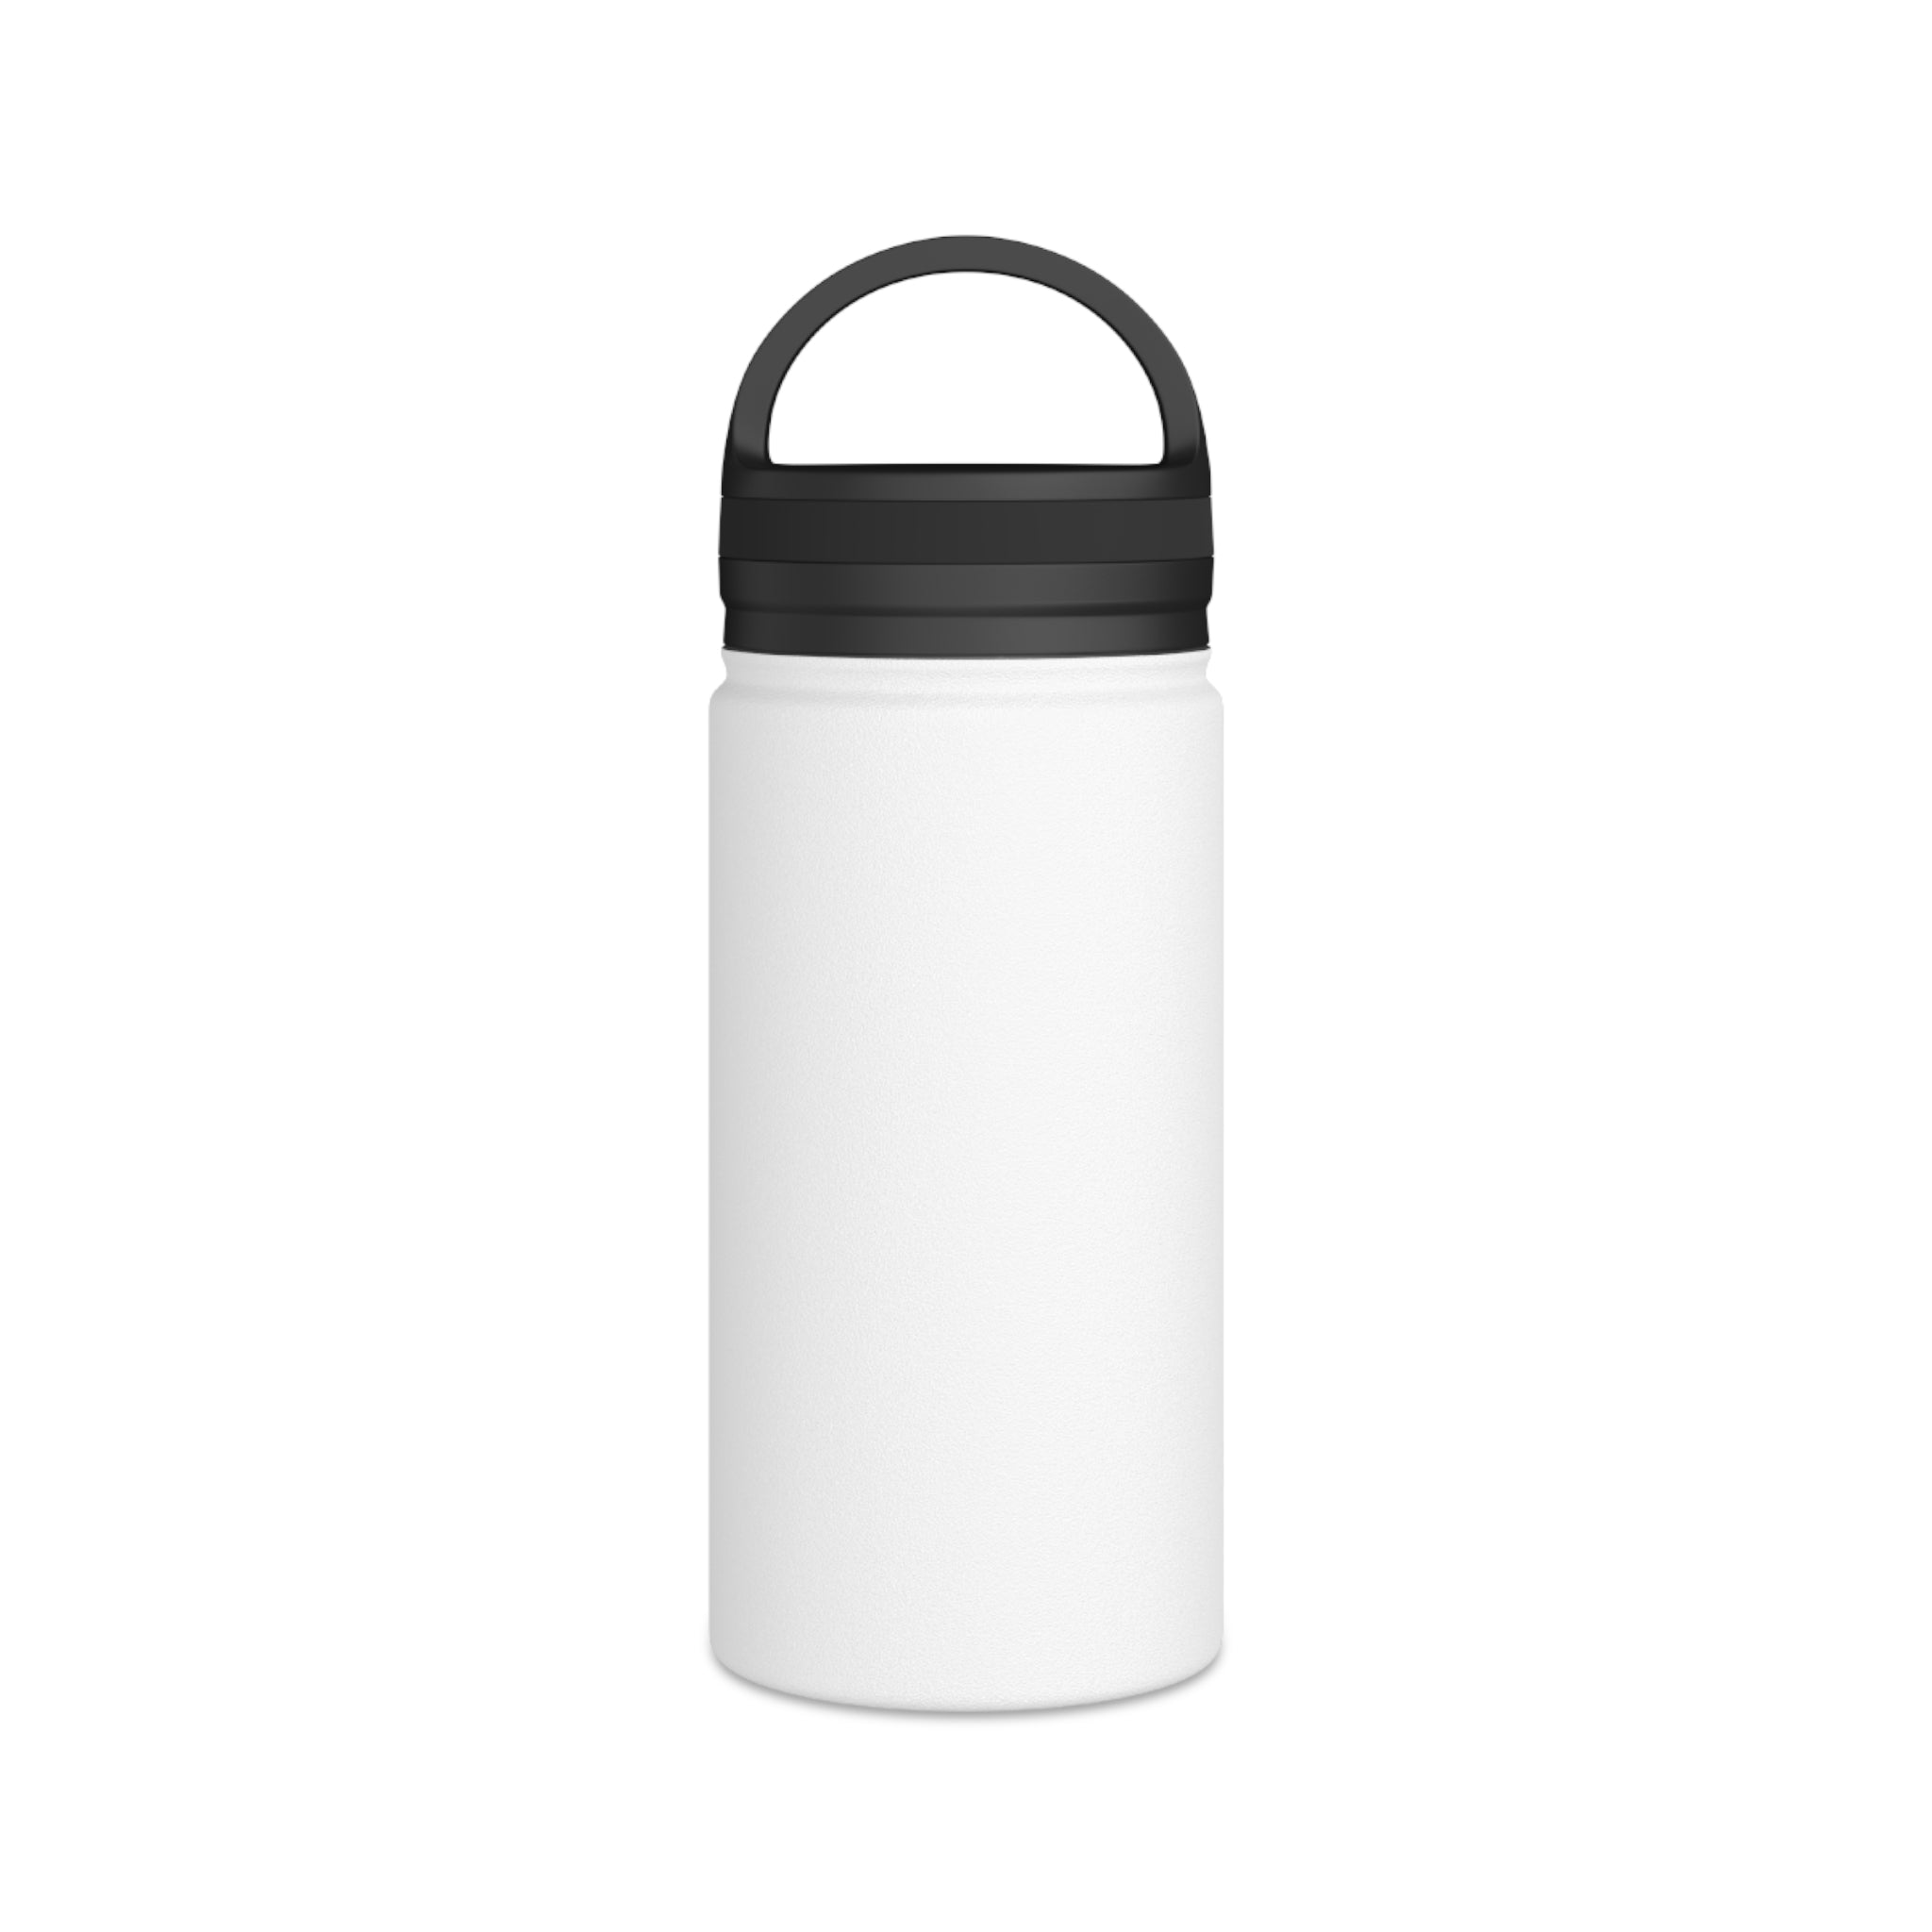 Beargrease Stainless Steel Water Bottle, Handle Lid - DSP On Demand